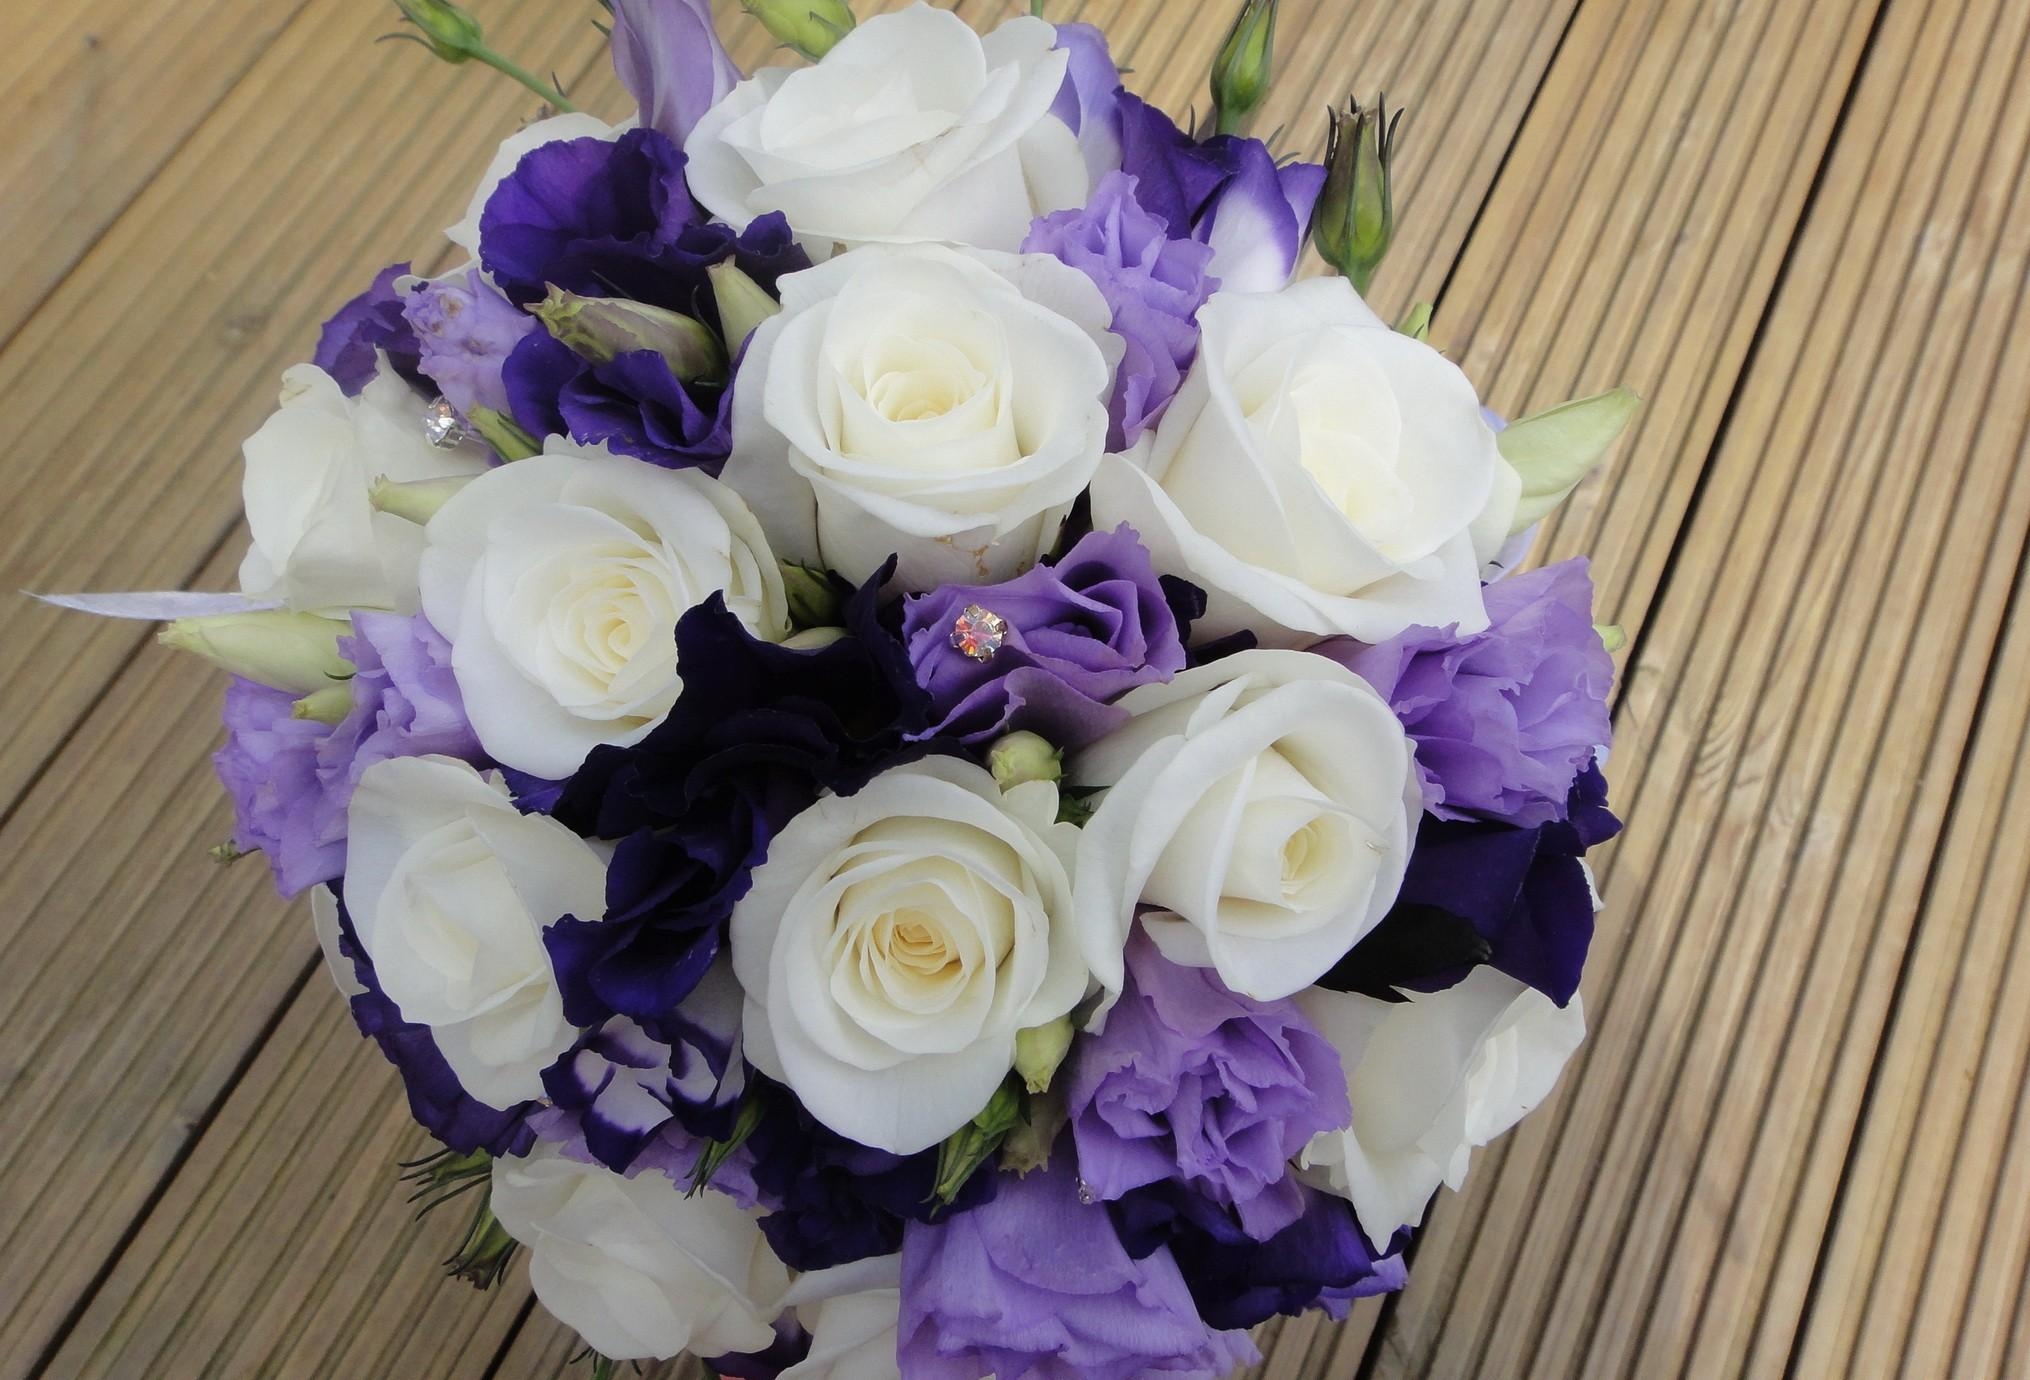 roses, flowers, registration, typography, bouquet, decoration, lisianthus russell, lisiantus russell